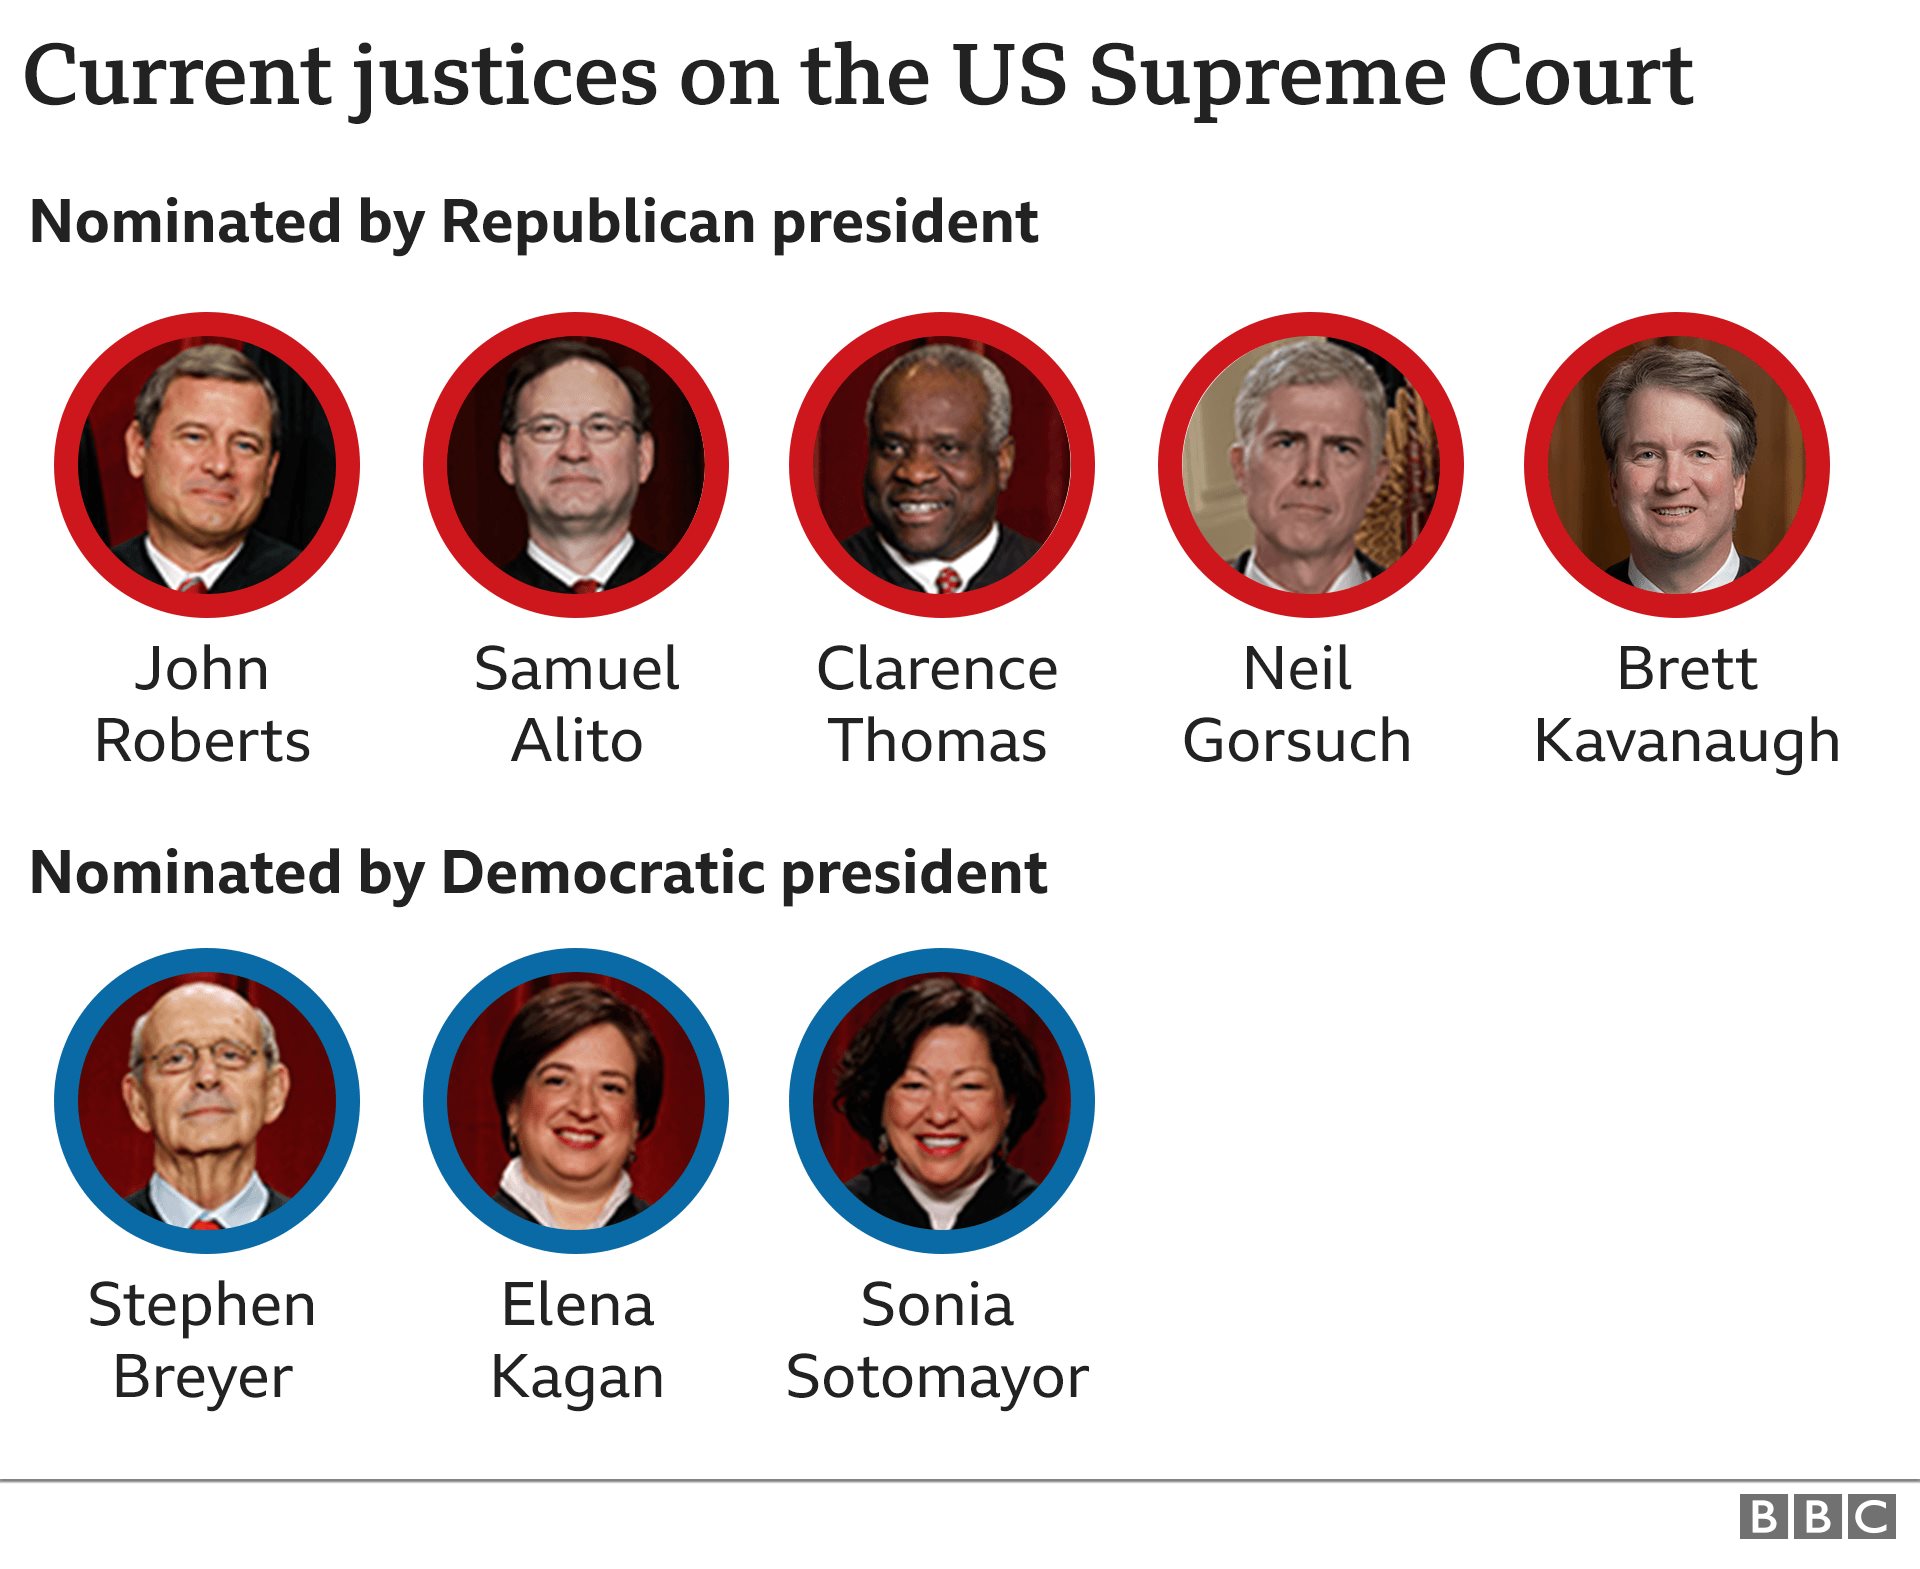 Political Affiliation Of The Supreme Court Justices The answer is